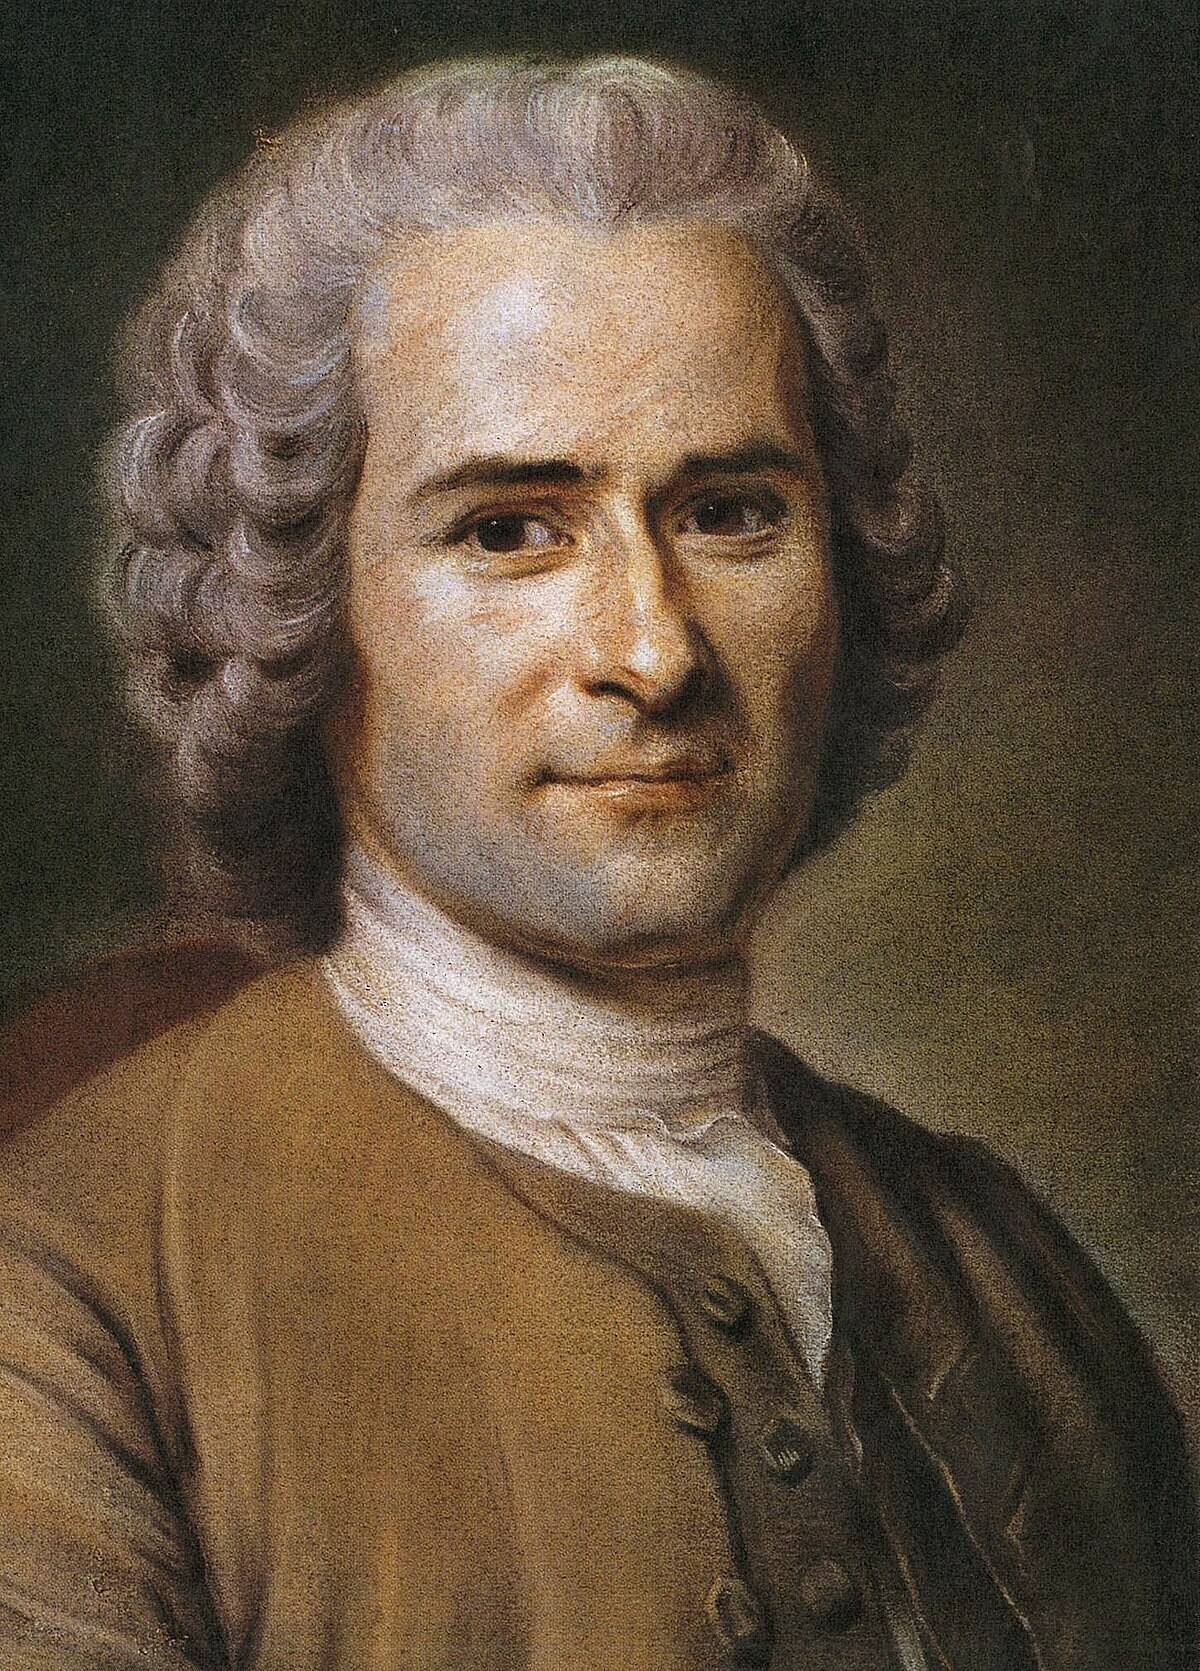 what nationality was jean-jacques rousseau?